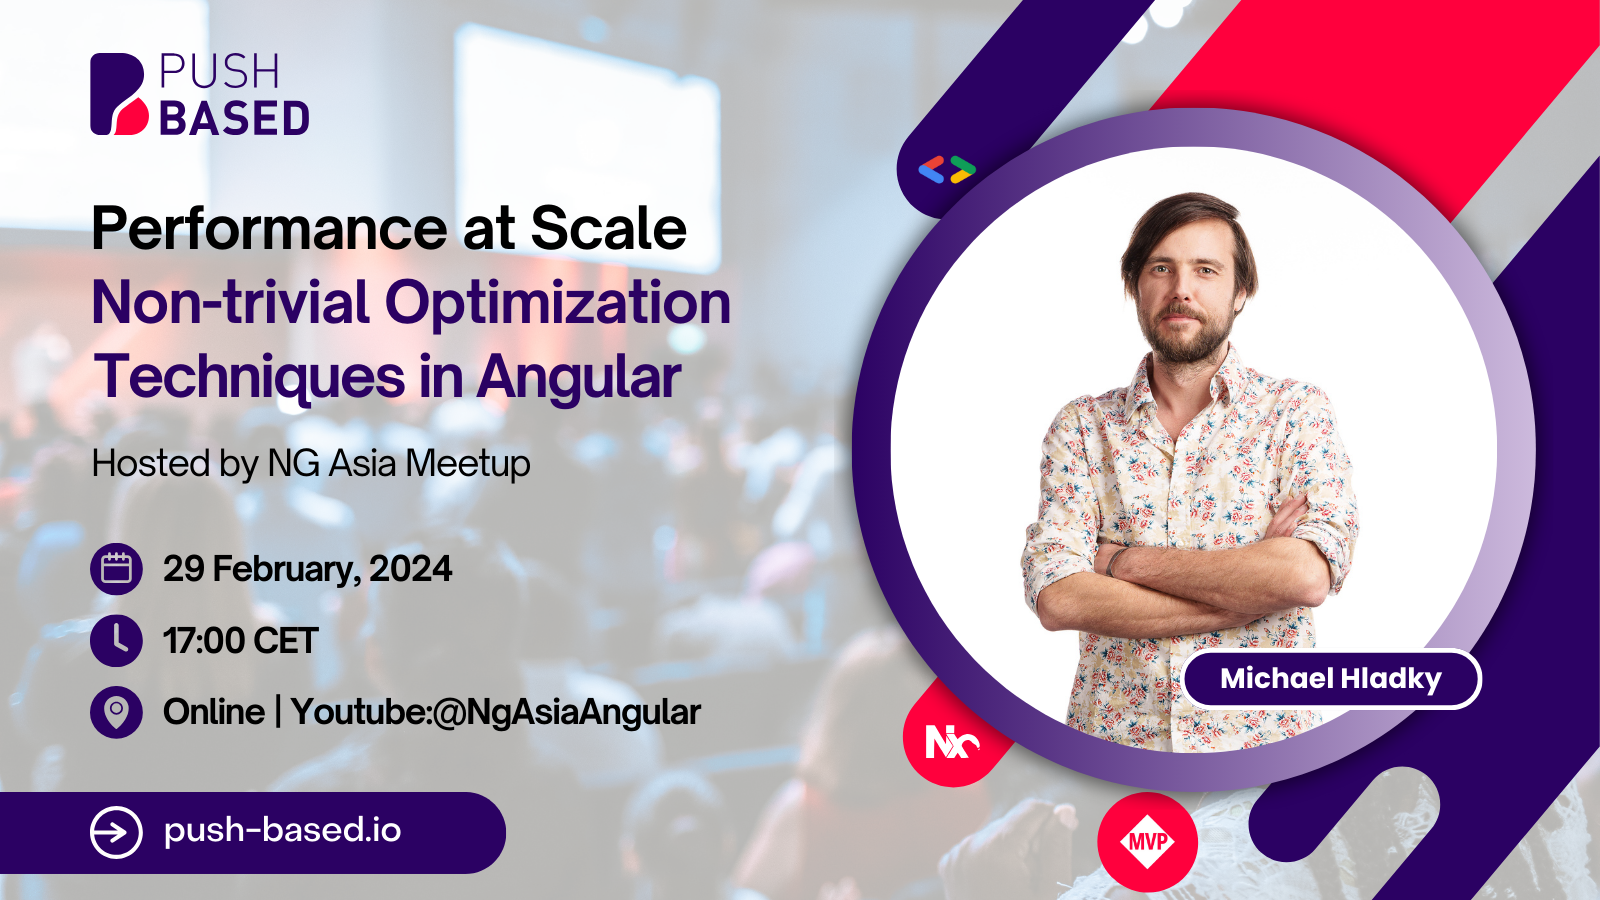 Performance at Scale: Non-trivial Optimization Techniques in Angular at NG Asia Meetup. Poster.